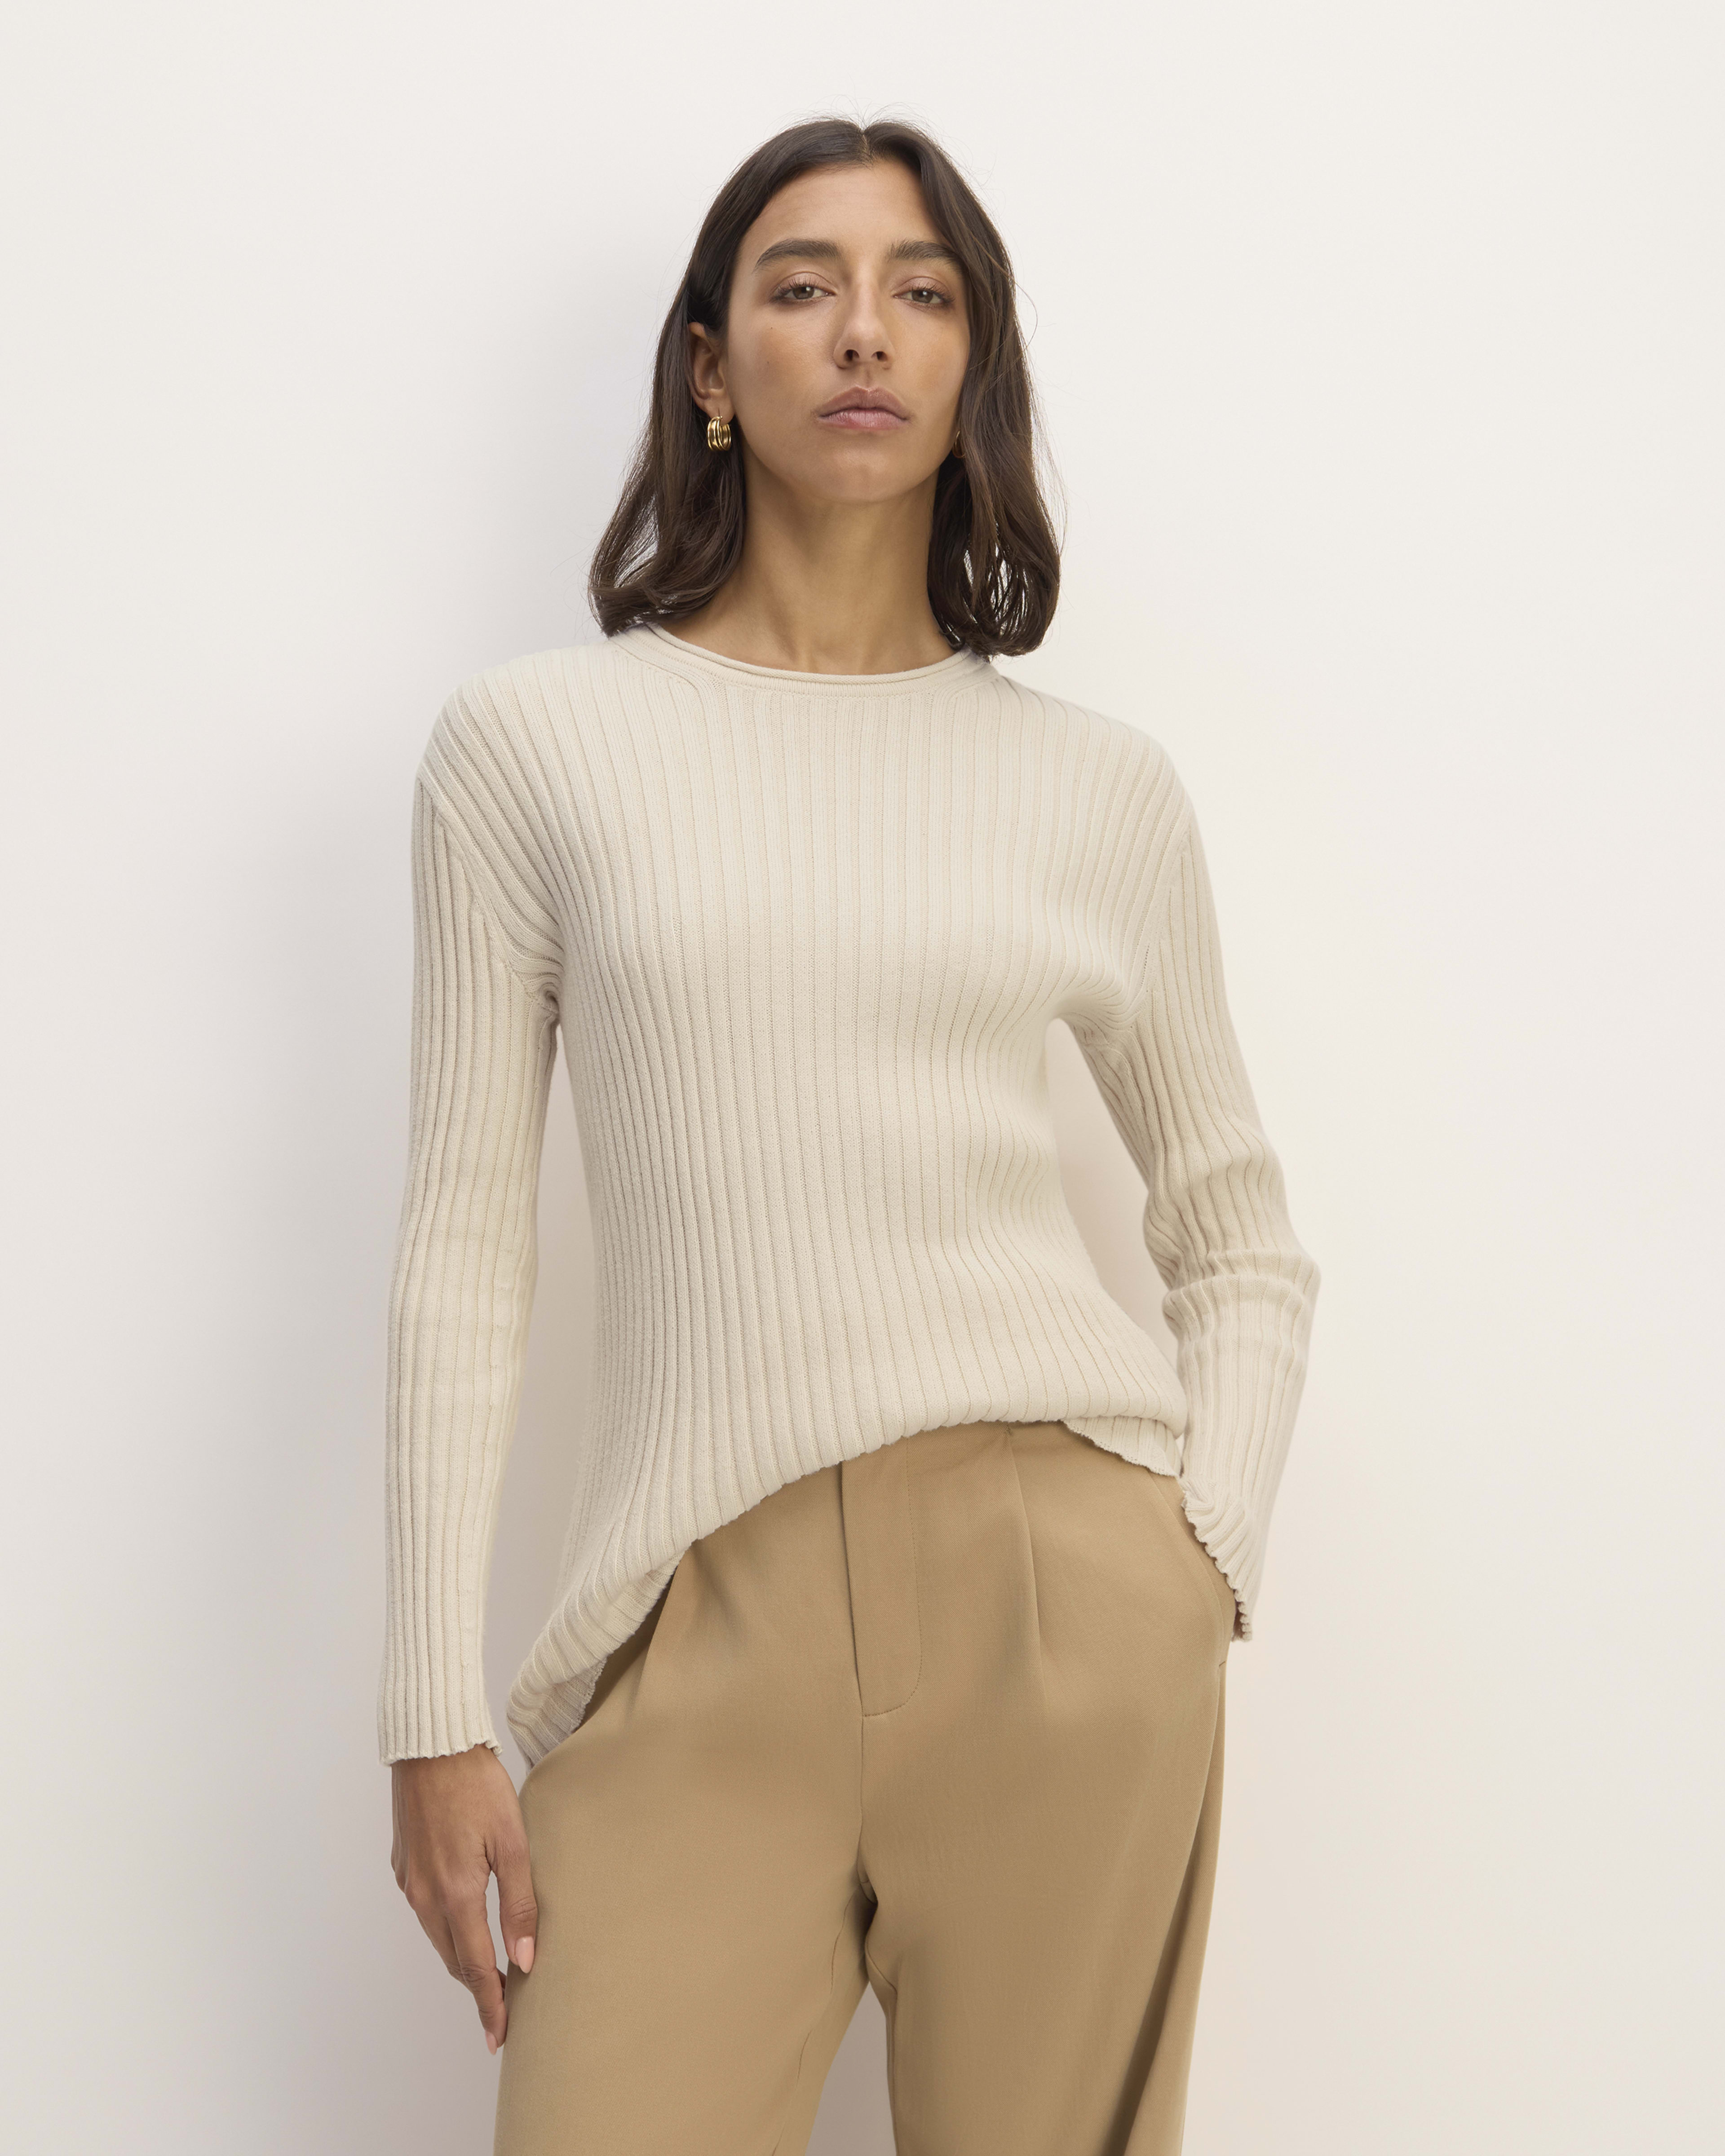 Women's Oversized Sweaters, Explore our New Arrivals